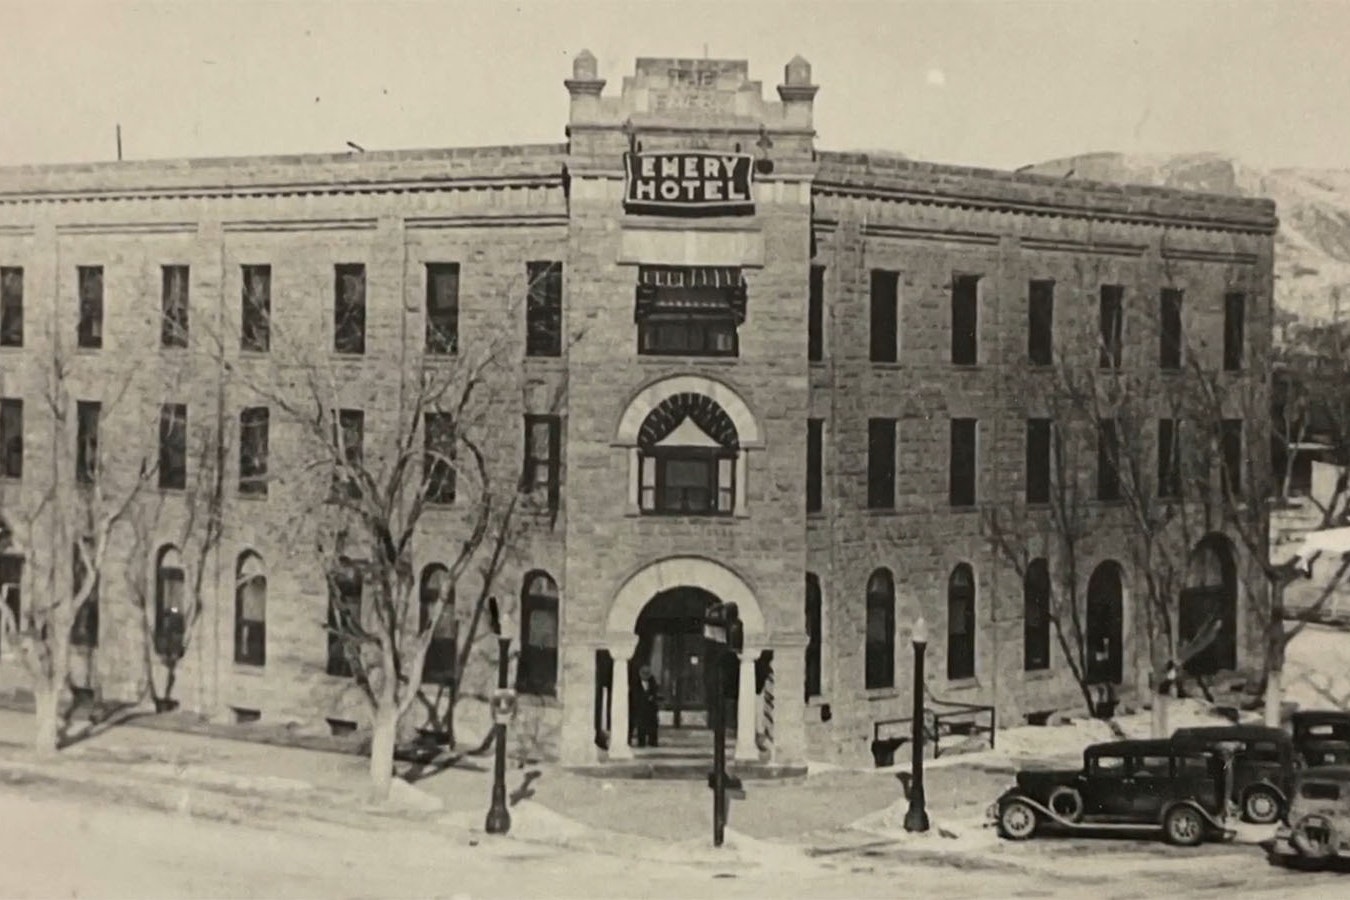 Built to be the height of modern luxury at the time in 1907, the Emery Hotel in Thermopolis was to be the centerpiece of a tourism destination that would make the town bigger than Denver — at least that was the vision.